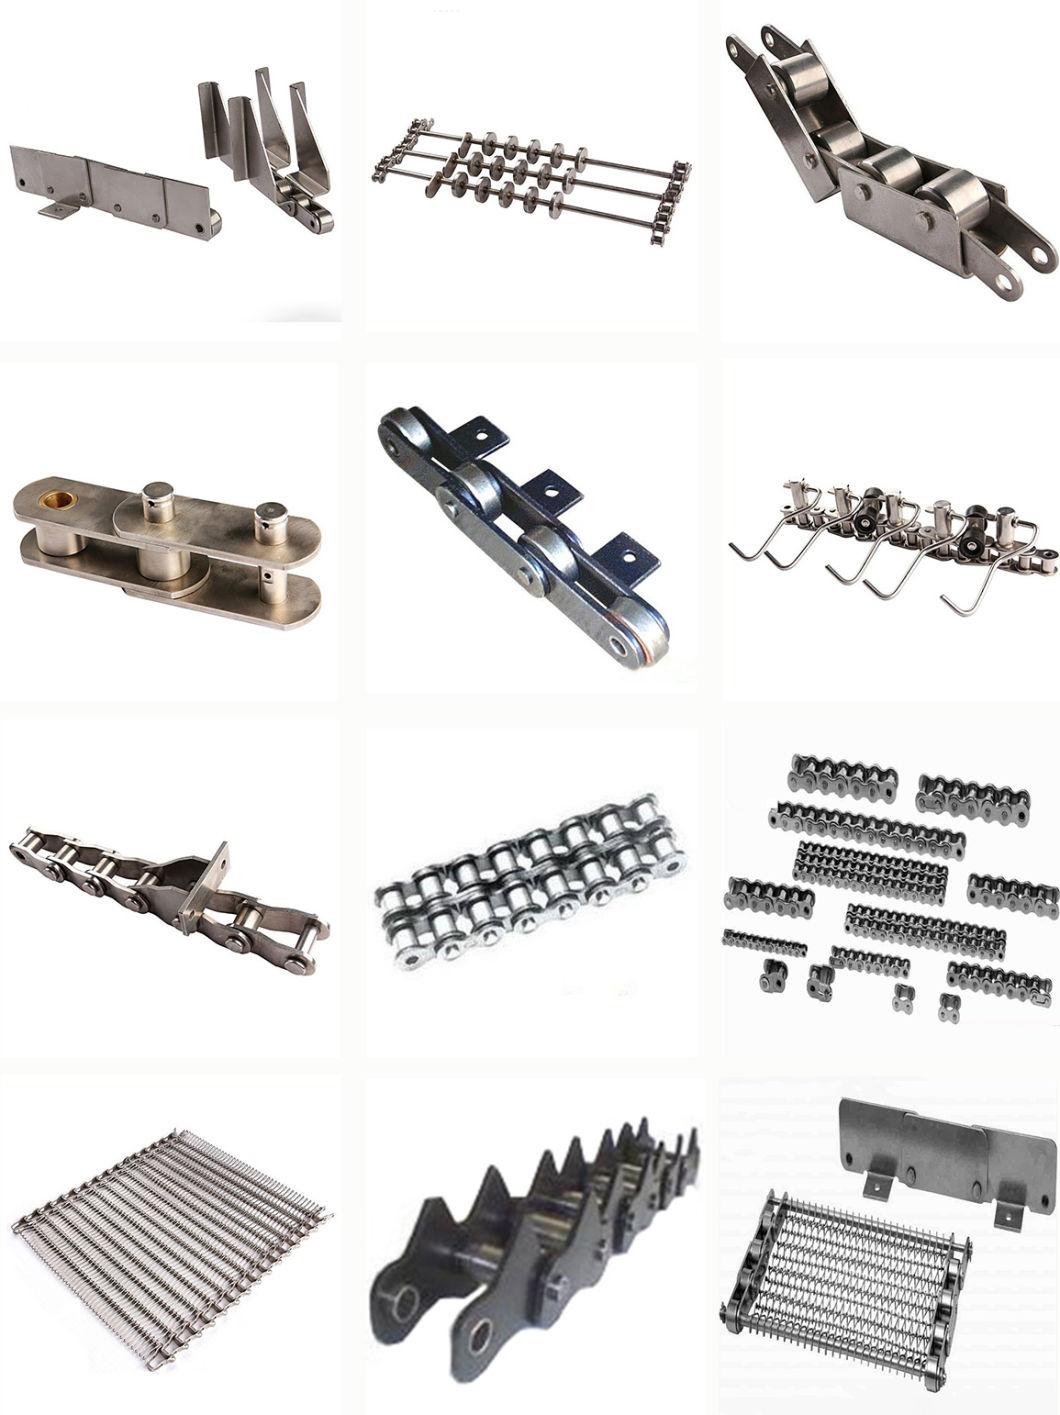 Professional Manufacturer High Precision Stainless Steel Conveyor Roller Chain with Attachment Wsa1 & Wsa2 & Wsk1 & Wsk2